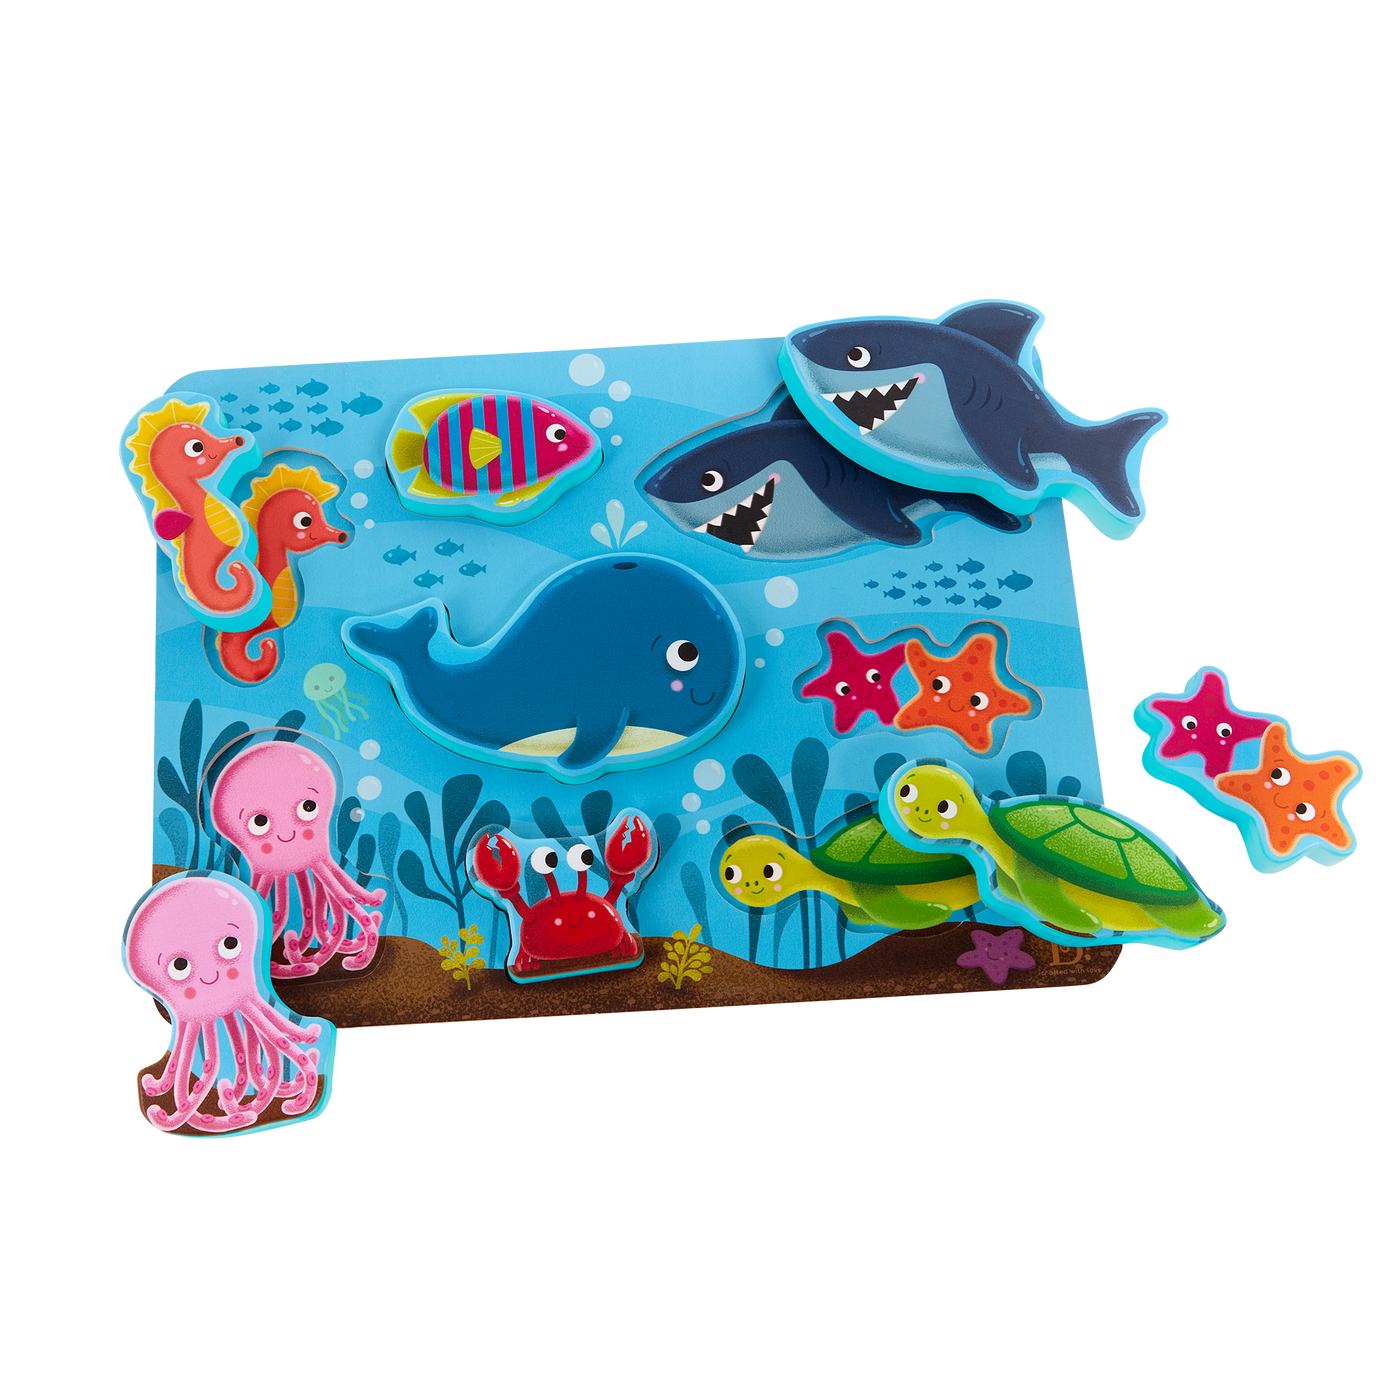 Chunky ocean animals puzzle.